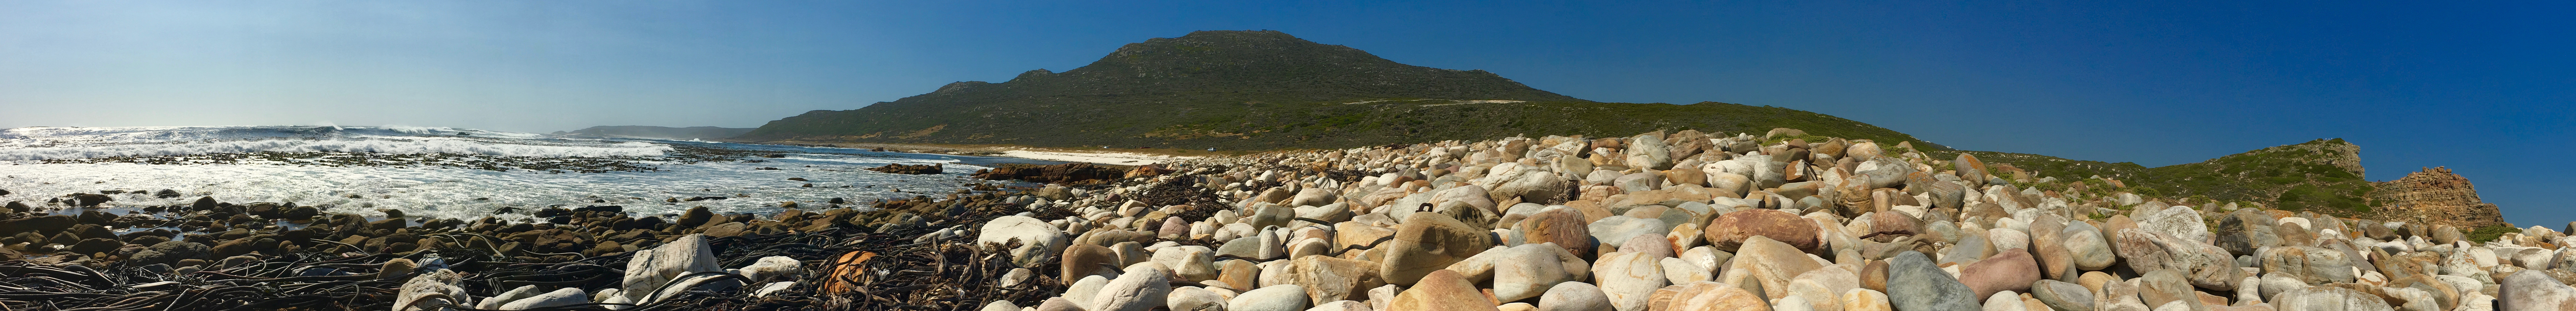 Cape of Good Hope pano 1